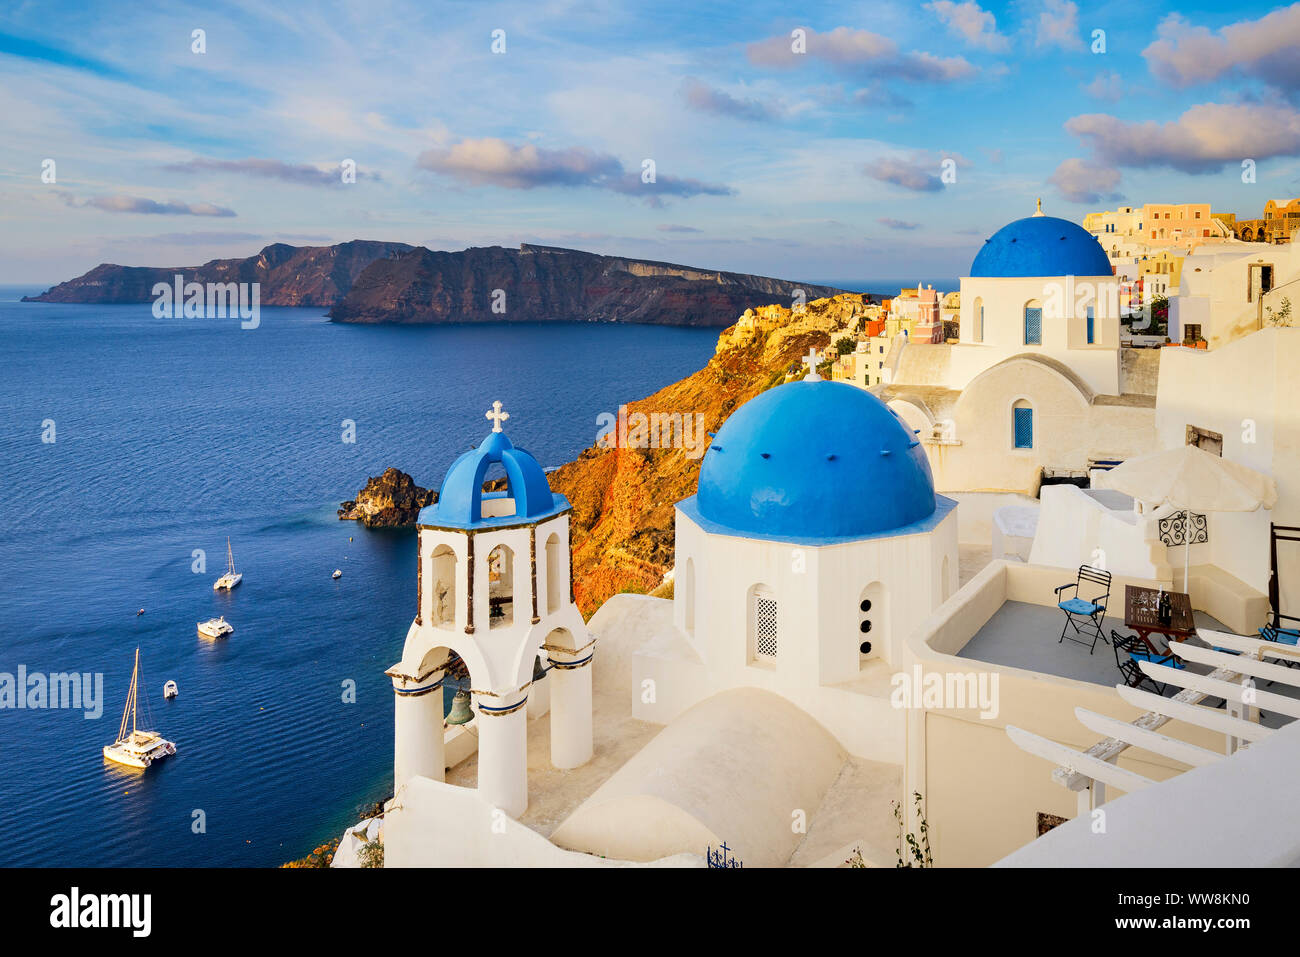 Oia town on Santorini island, Greece with traditional buildings with blue domes Stock Photo